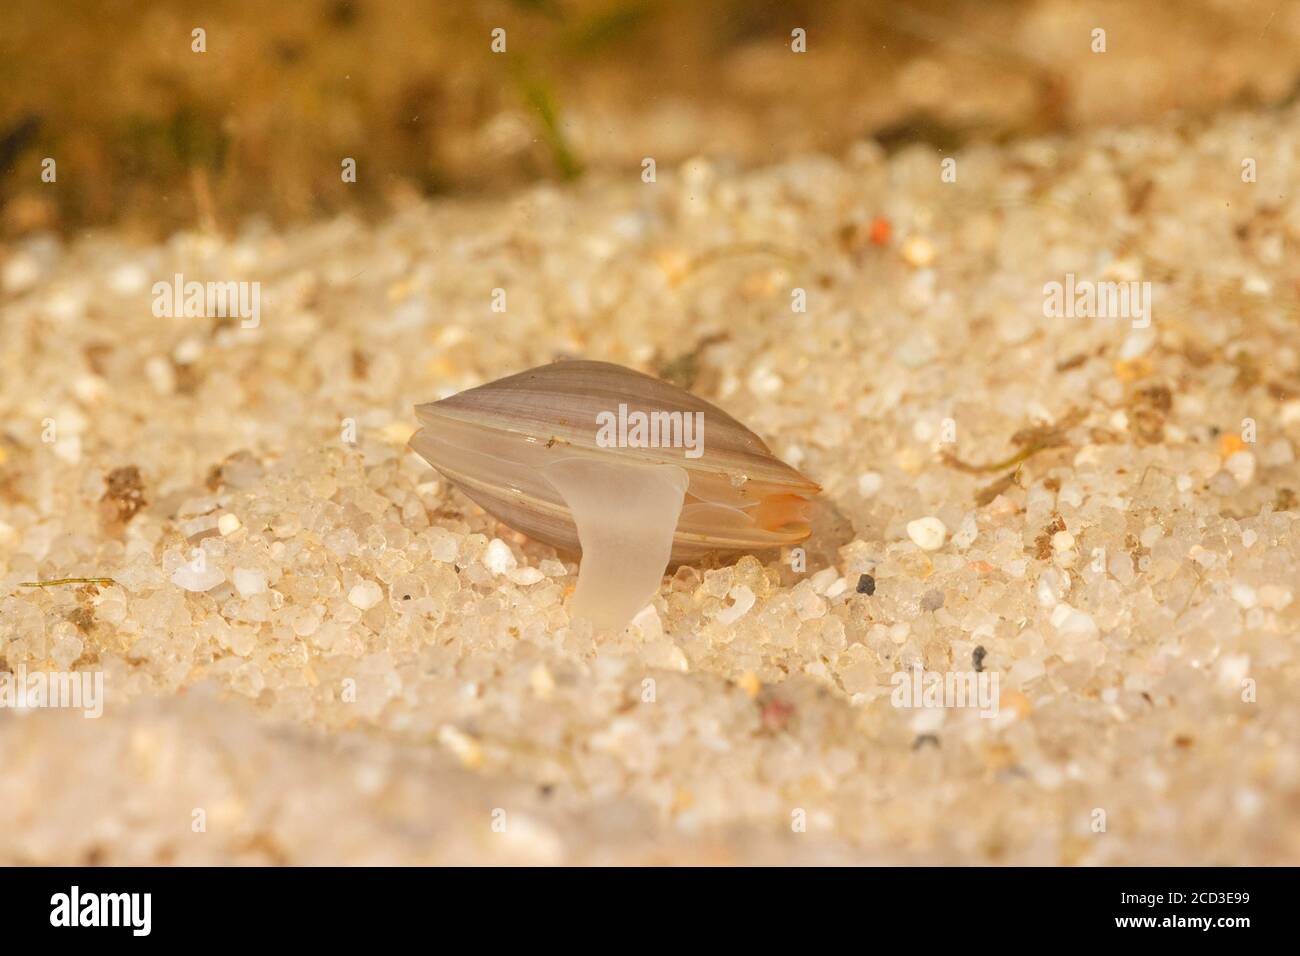 lake orb mussel, lake fingernailclam, capped orb mussel (Musculium lacustre, Sphaerium lacustre), creeping over sandy bottom, foot clearly visible Stock Photo